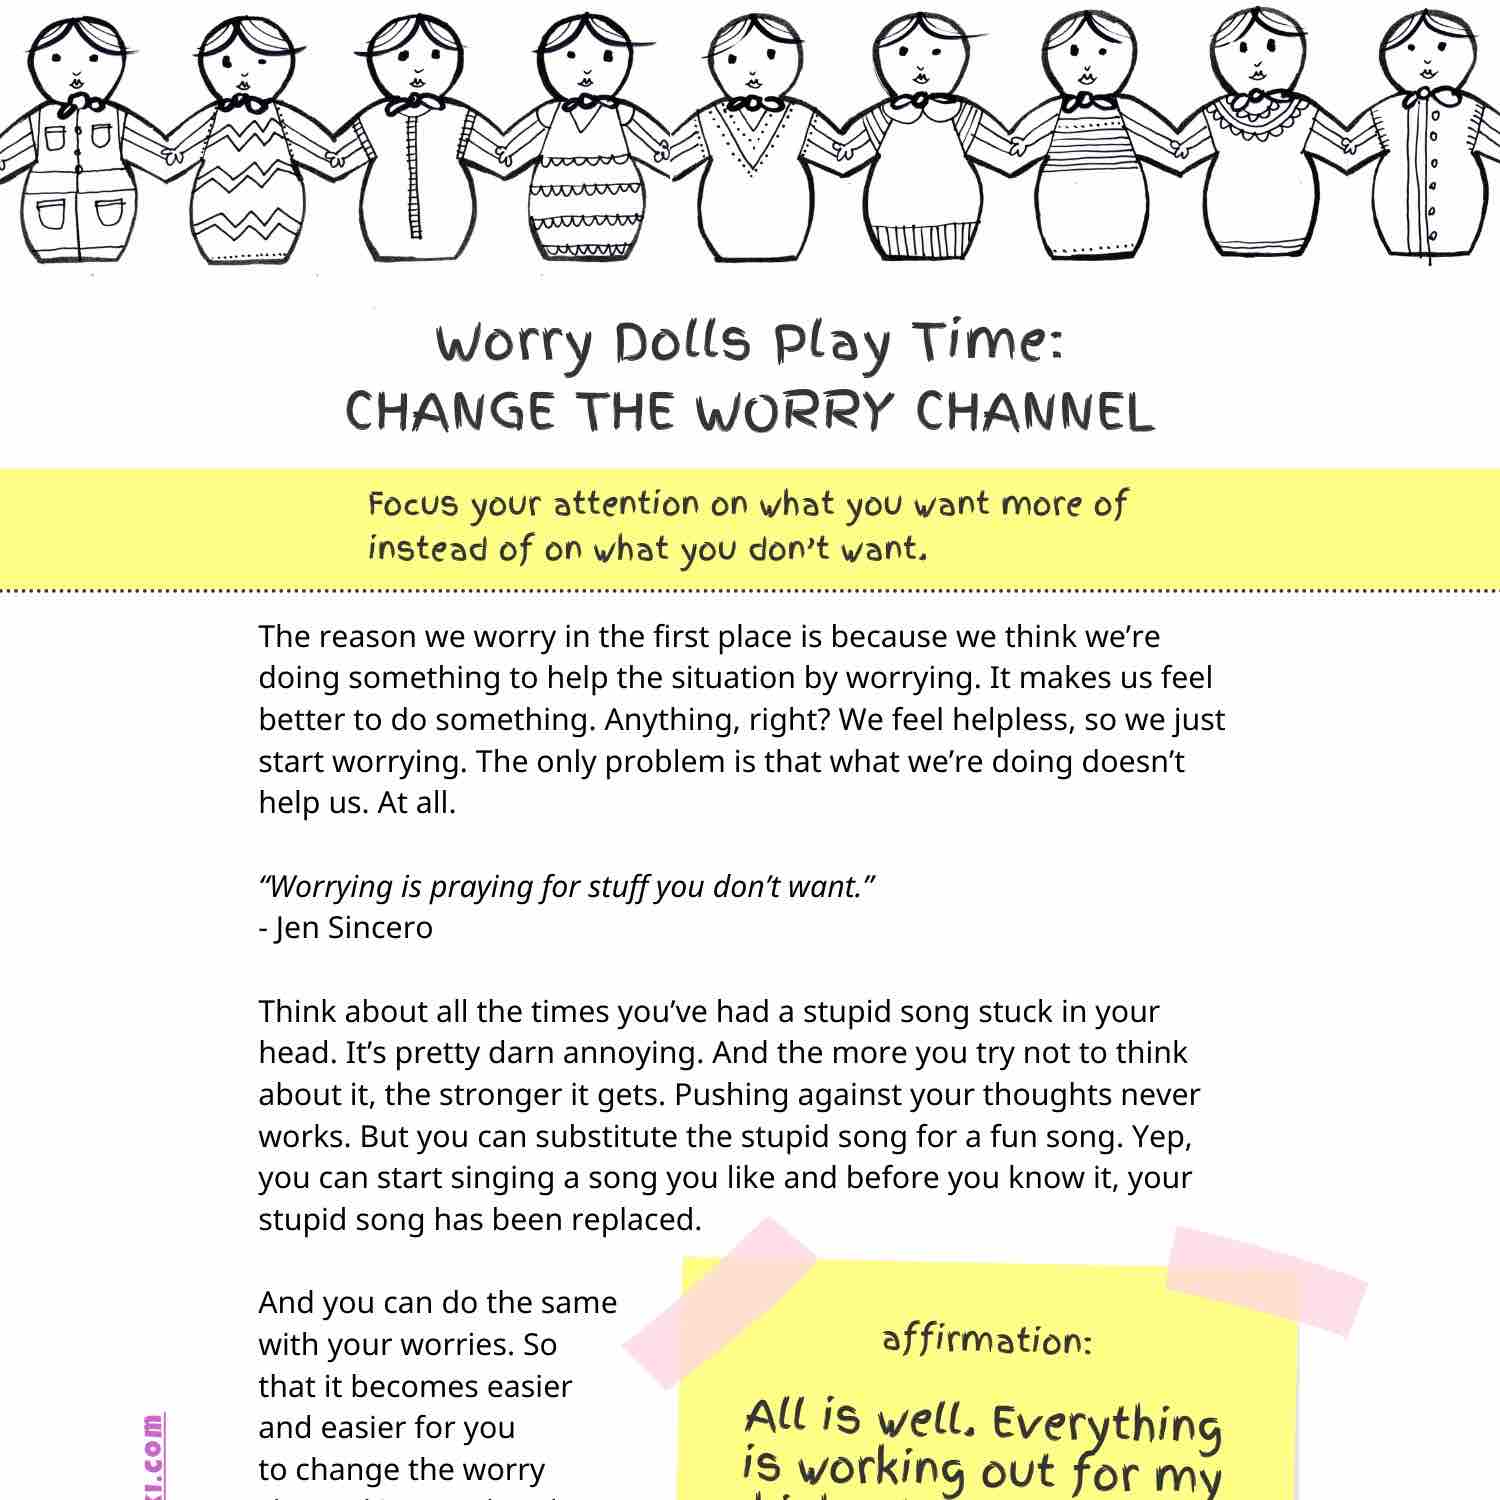 A detail of a worksheet called Change The Worry Channel by Alex Mitchell from the workshop Worry Dolls Play Time.